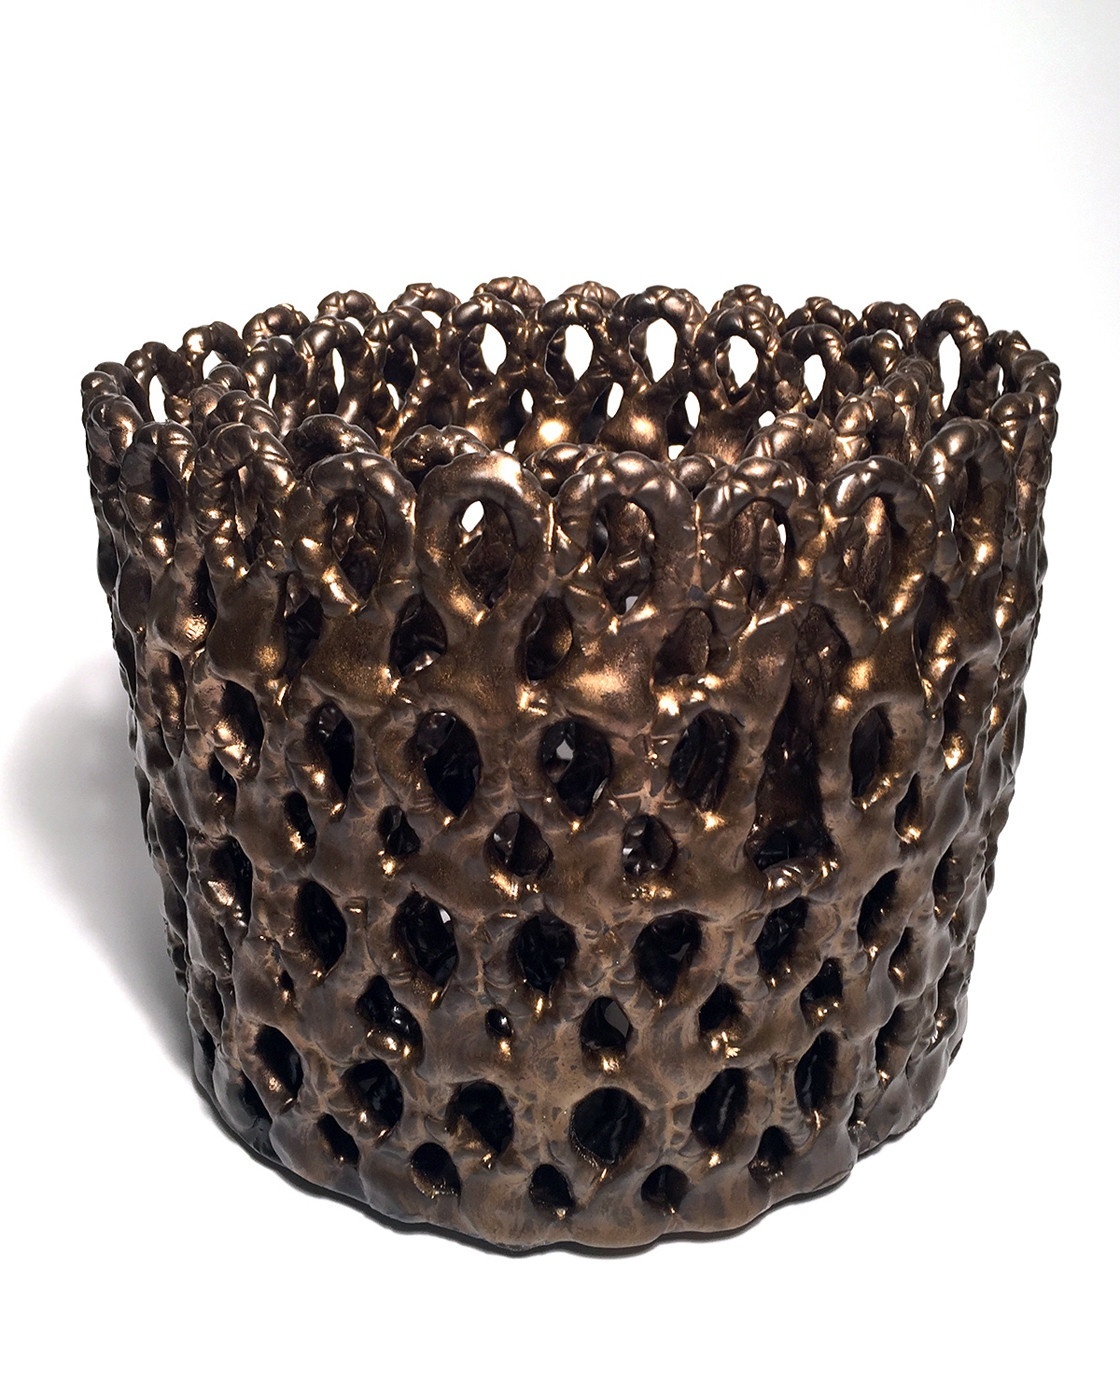 An intricately looped/patterned vessel in bronze.